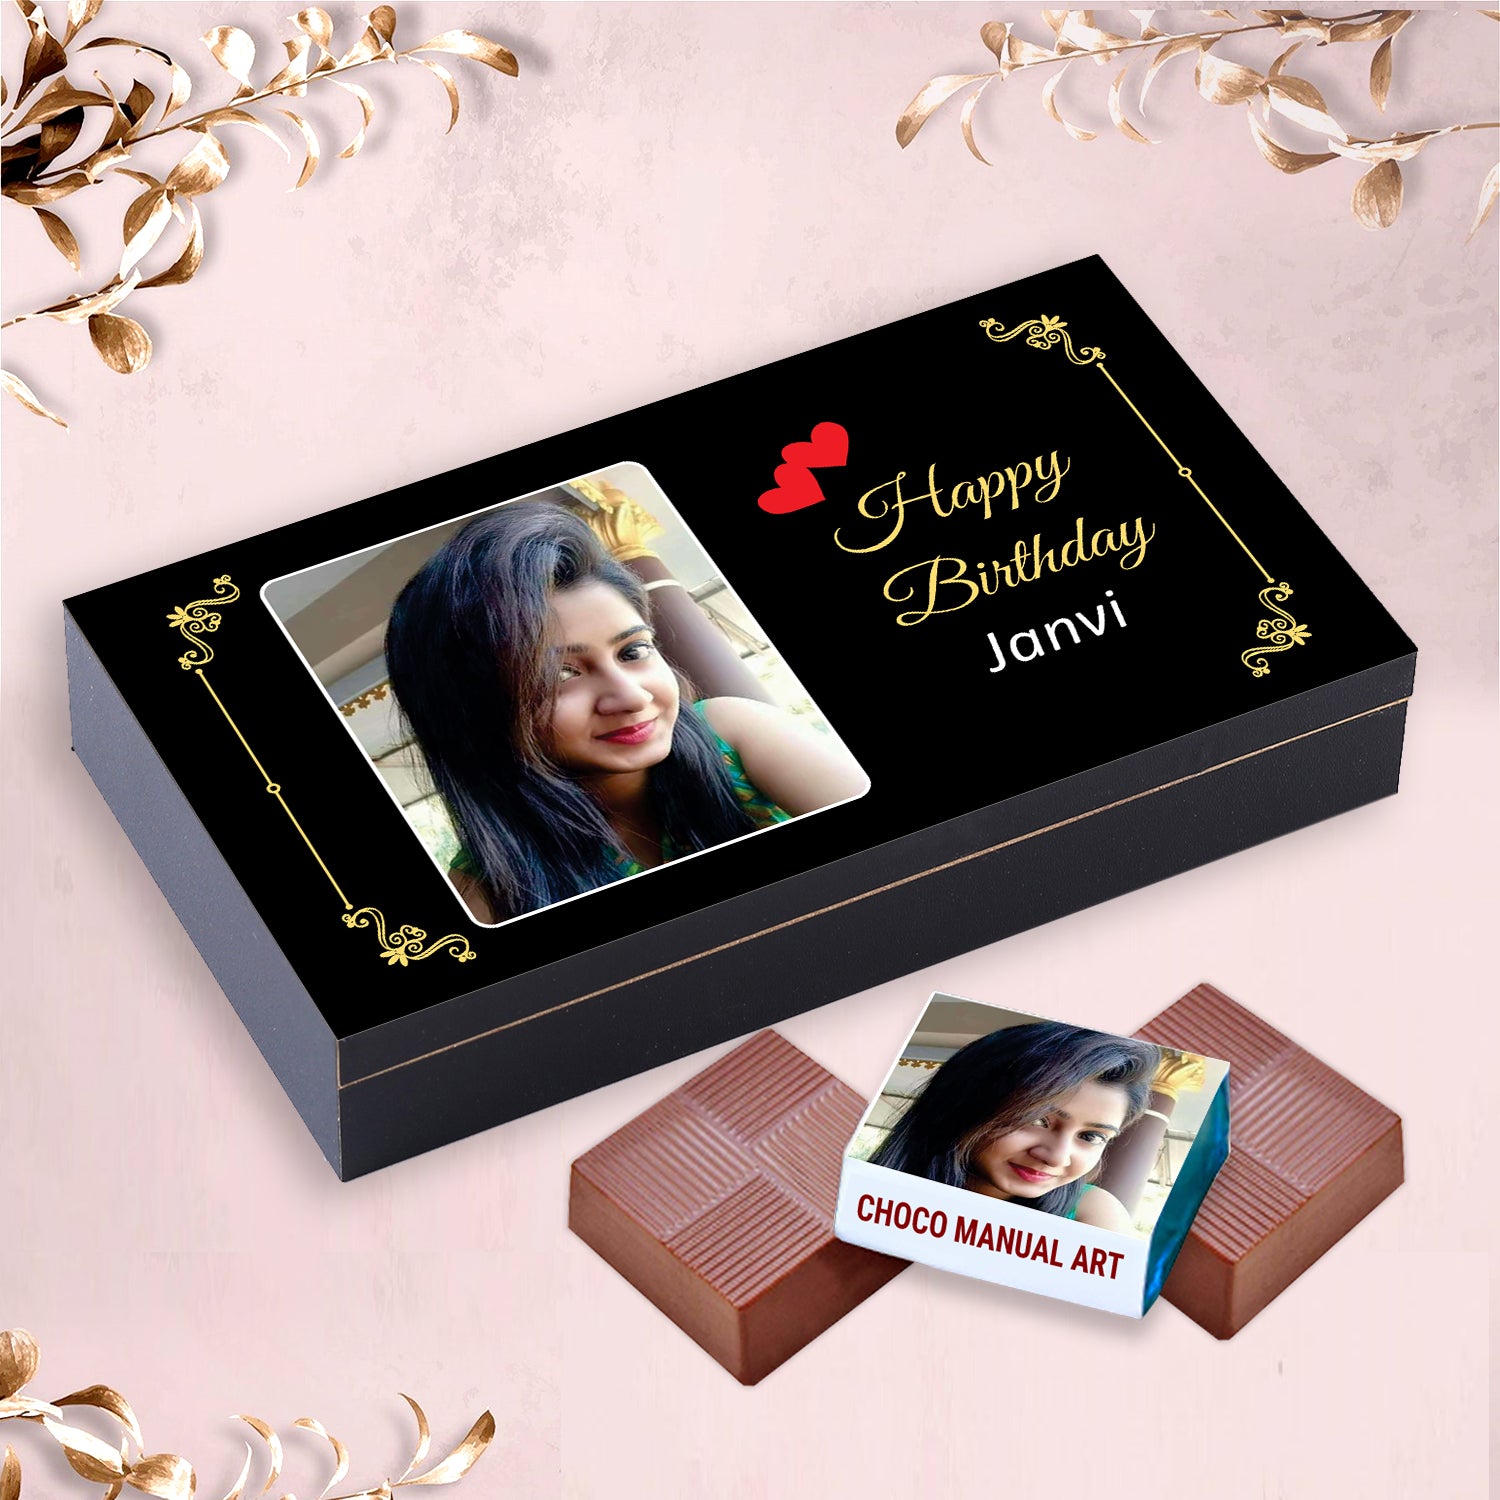  UNIQUE YET AFFORDABLE CUSTOMIZED PHOTO GIFTS THAT ARE PERSONALIZED AND DELECTABLE .Chocolate gift for girlfriend. chocolate box gift ideas. Bithday gift for gifriend. Birthday gift for mom..